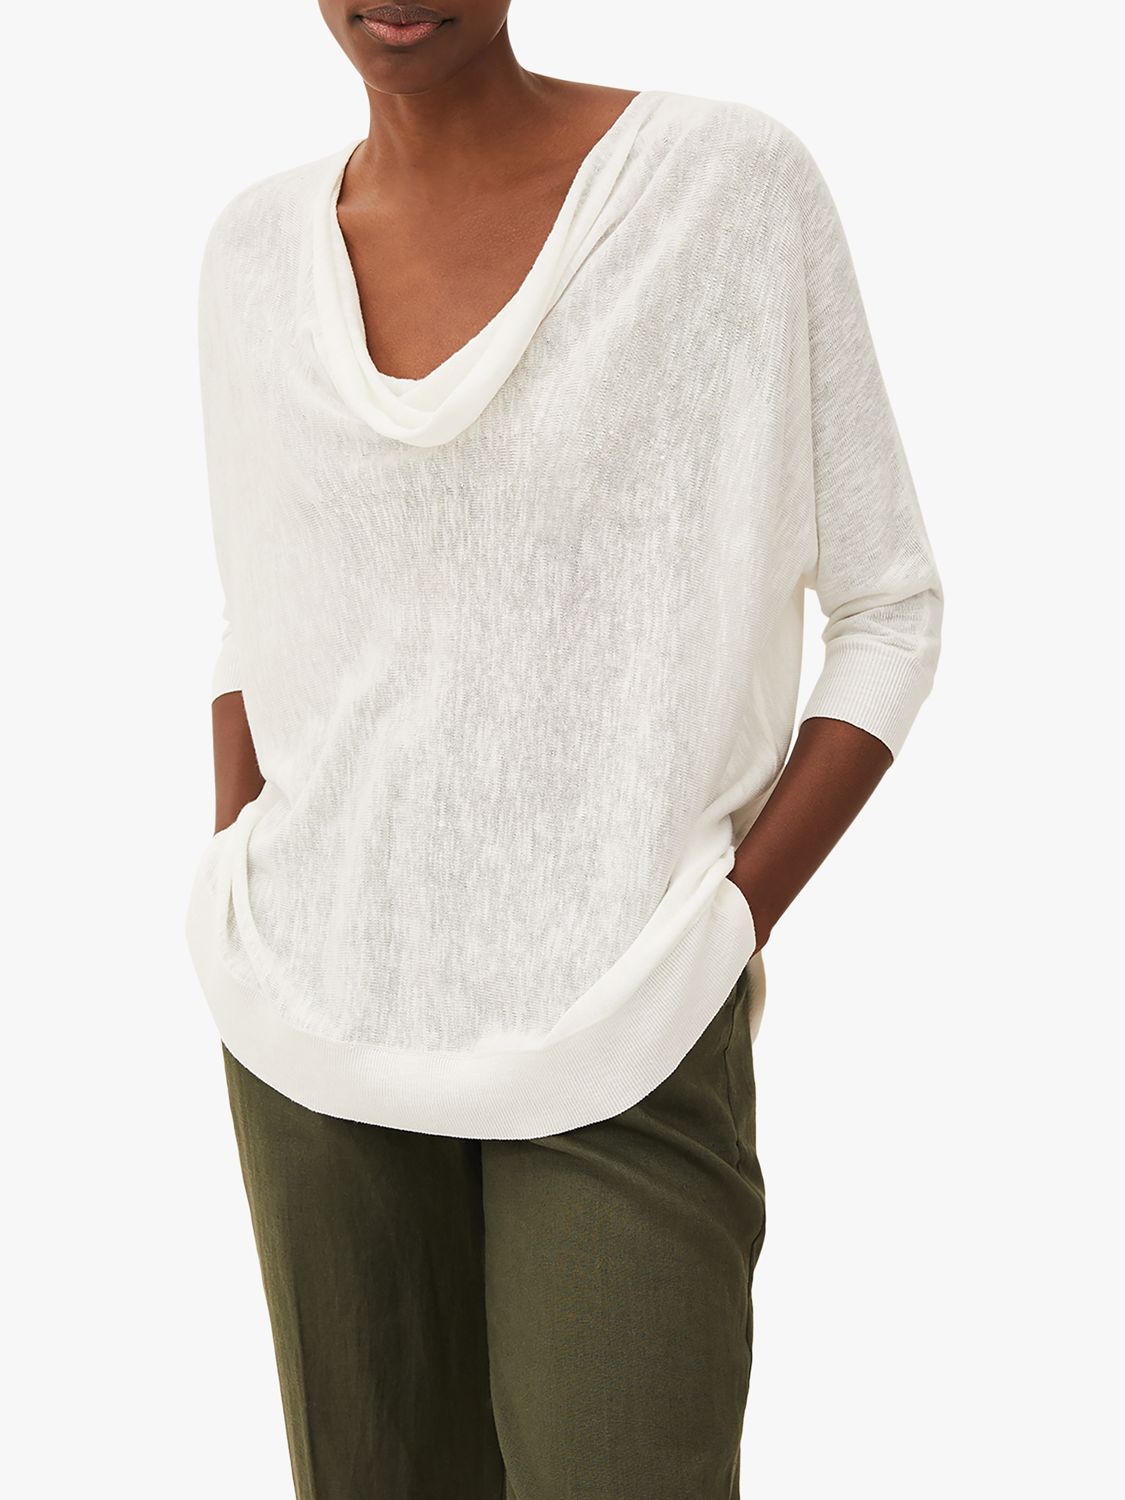 Phase Eight Clare Linen Cowl Neck Knit Top, White